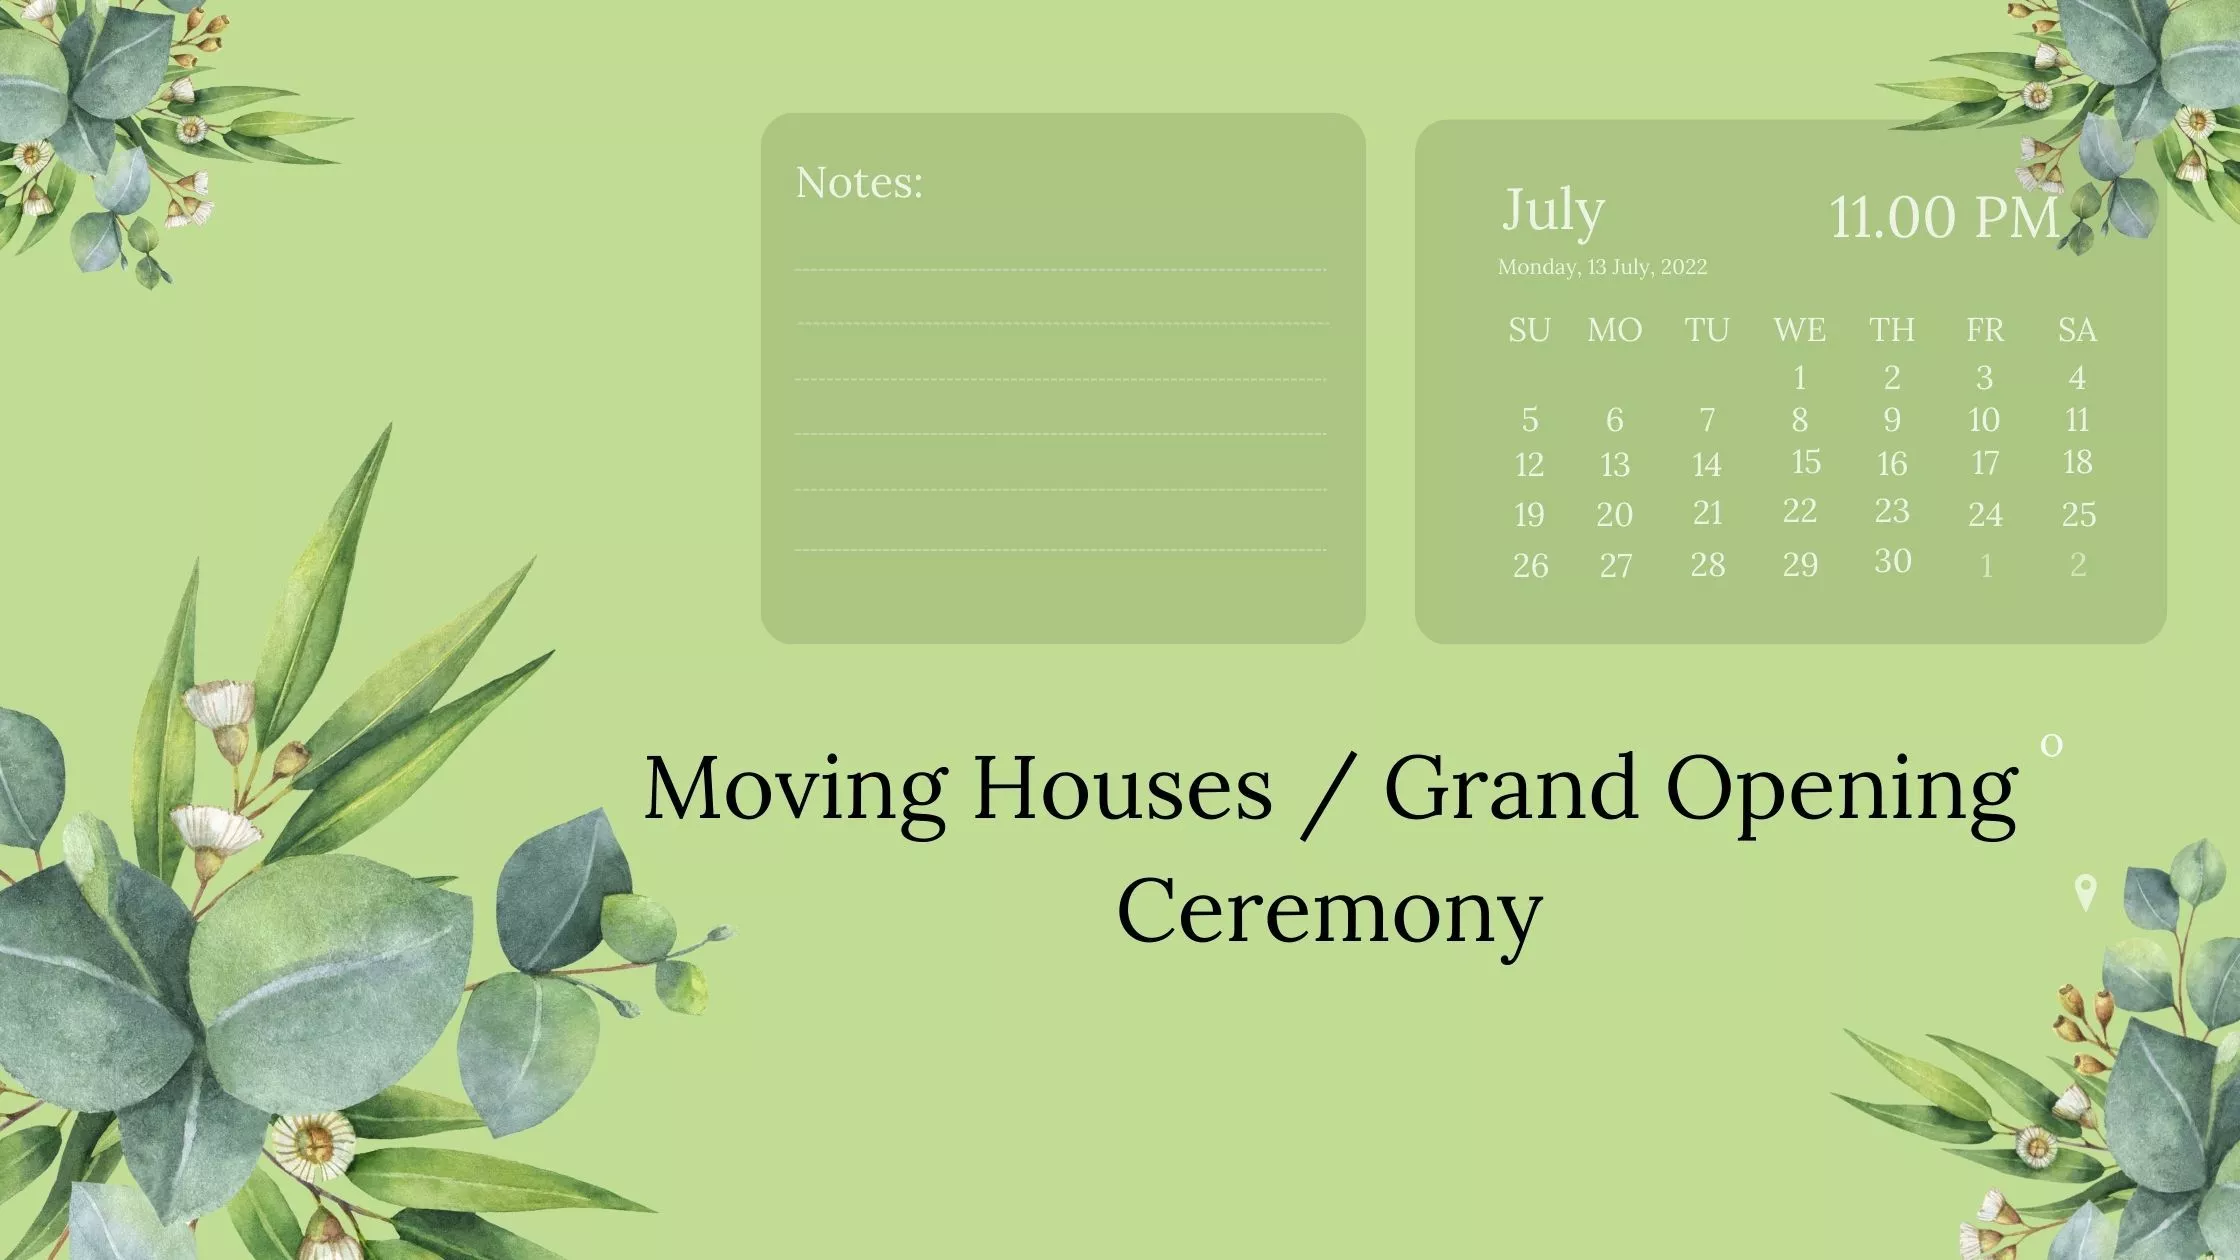 Moving Houses / Grand Opening Ceremony